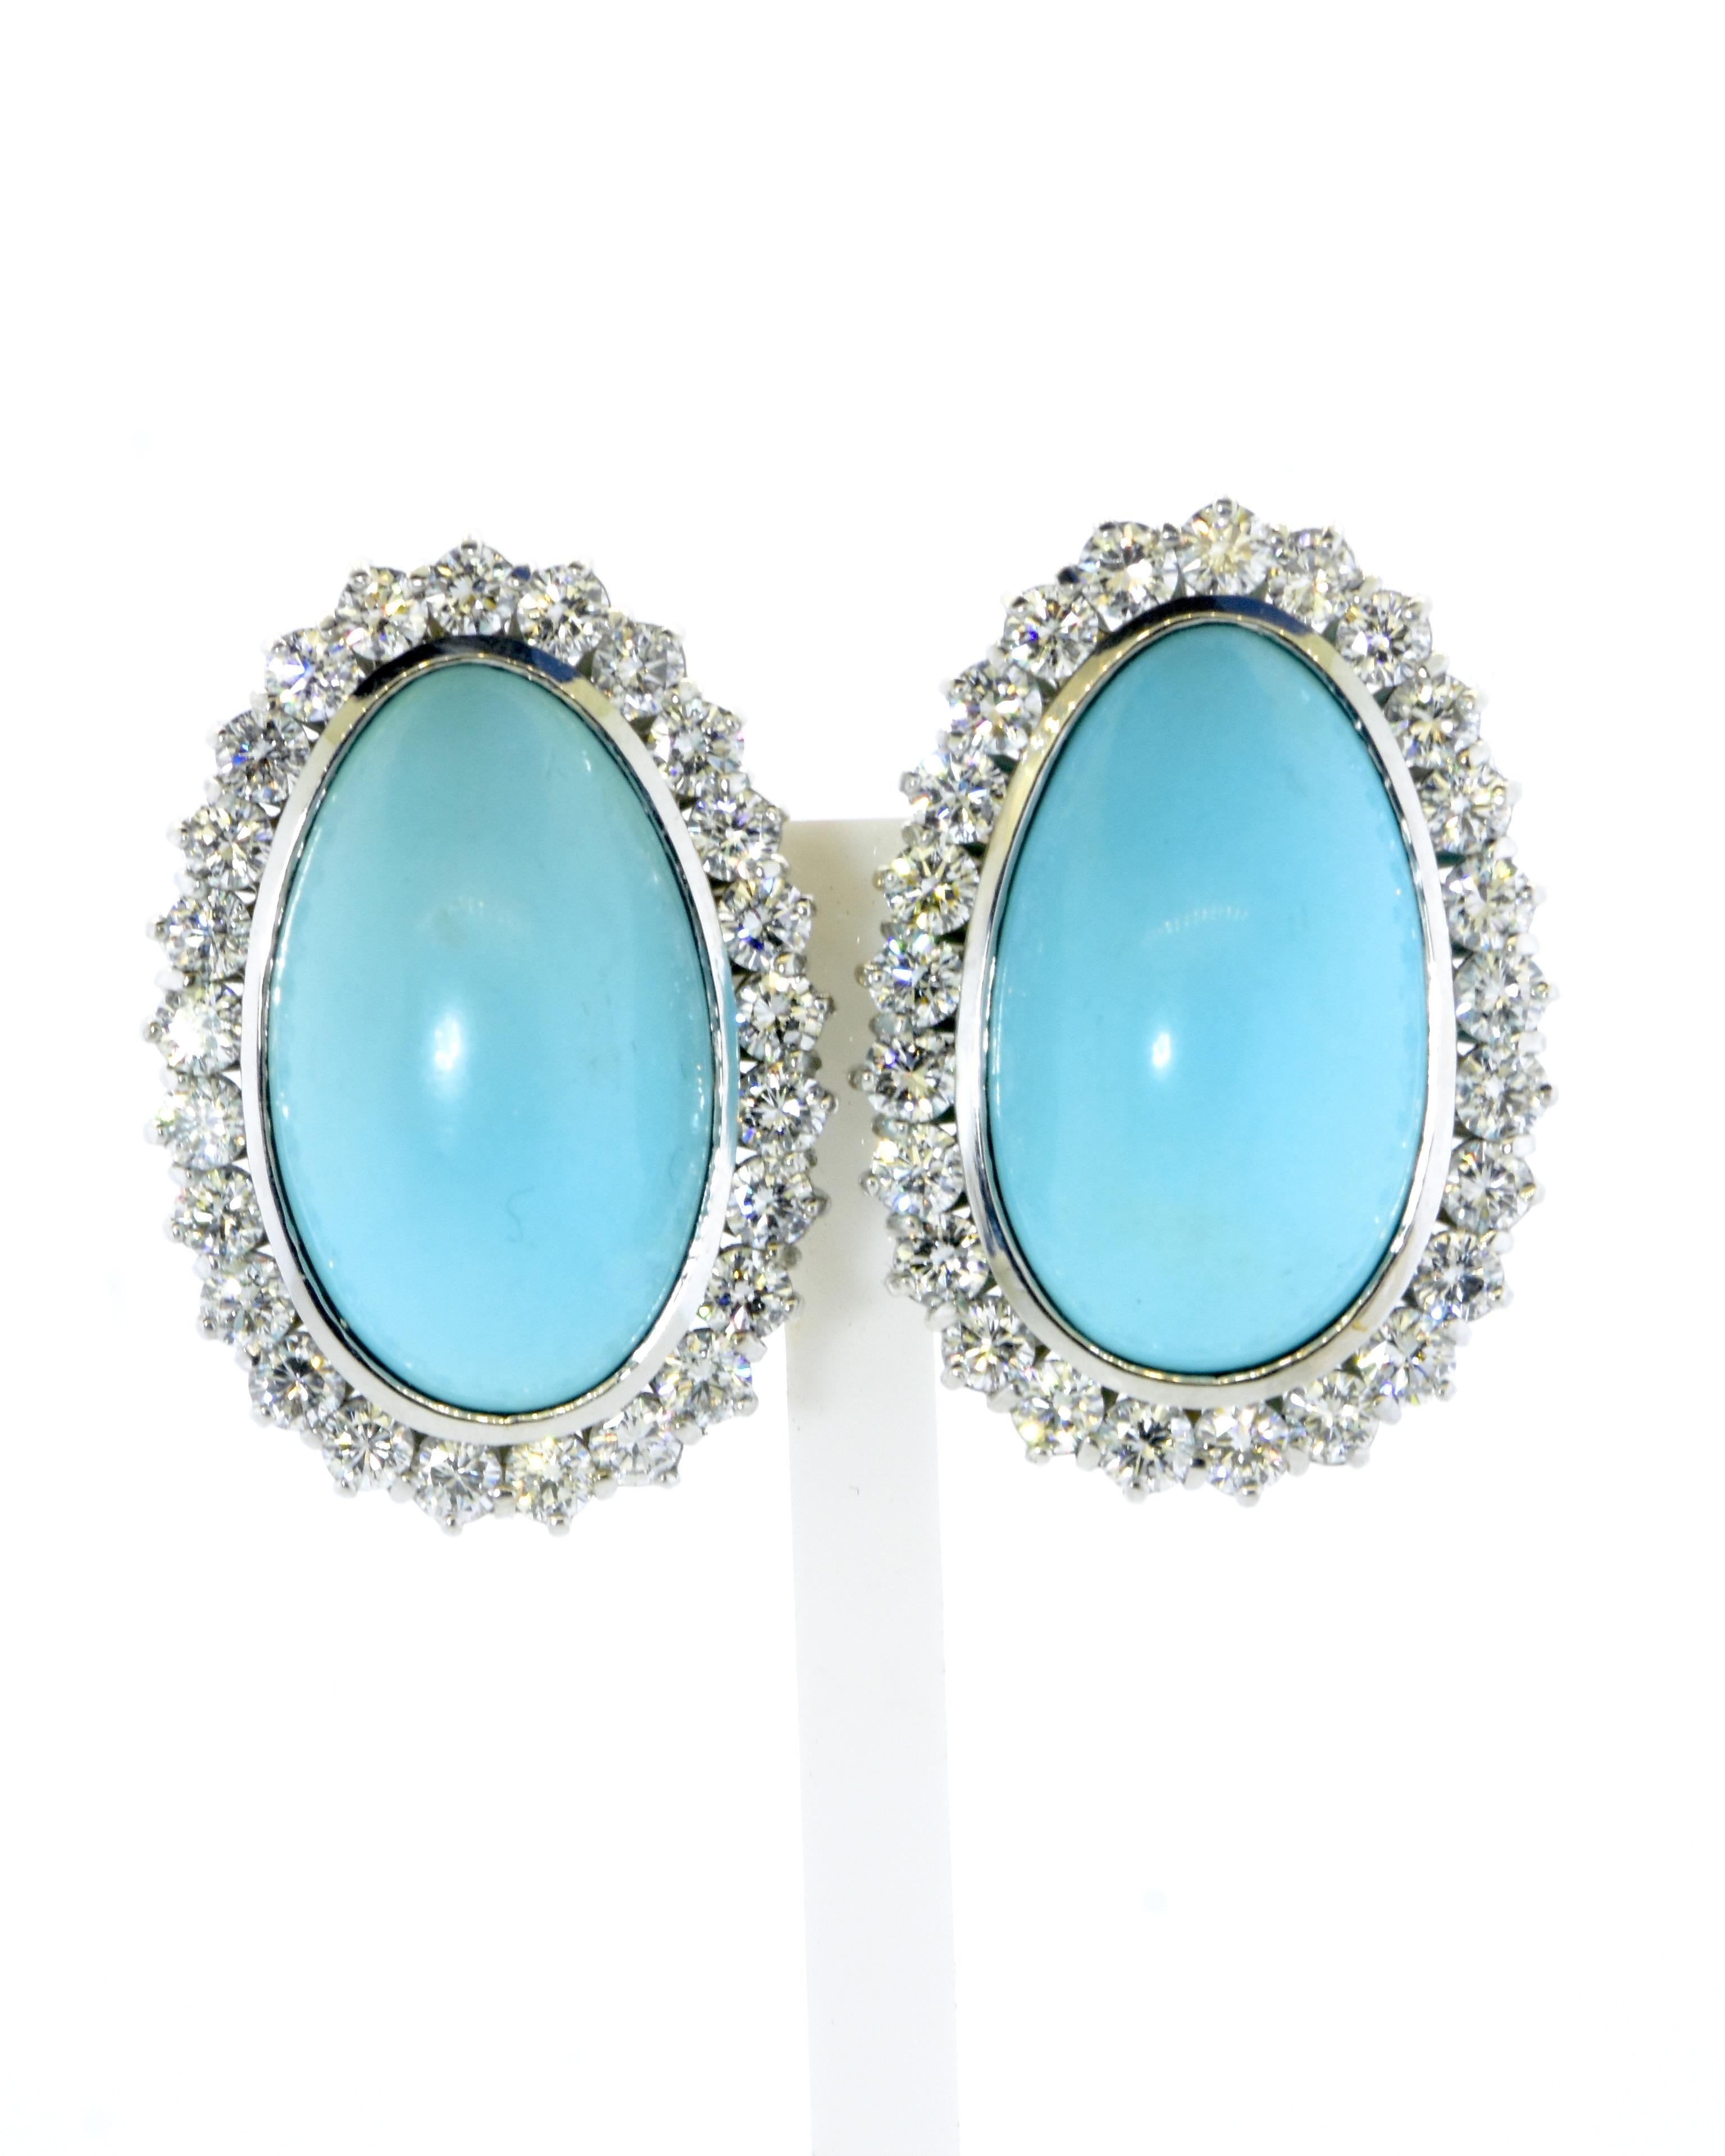 Cabochon Large and Important Fine Turquoise & Diamond, 18K White Gold Earrings, c. 1990 For Sale